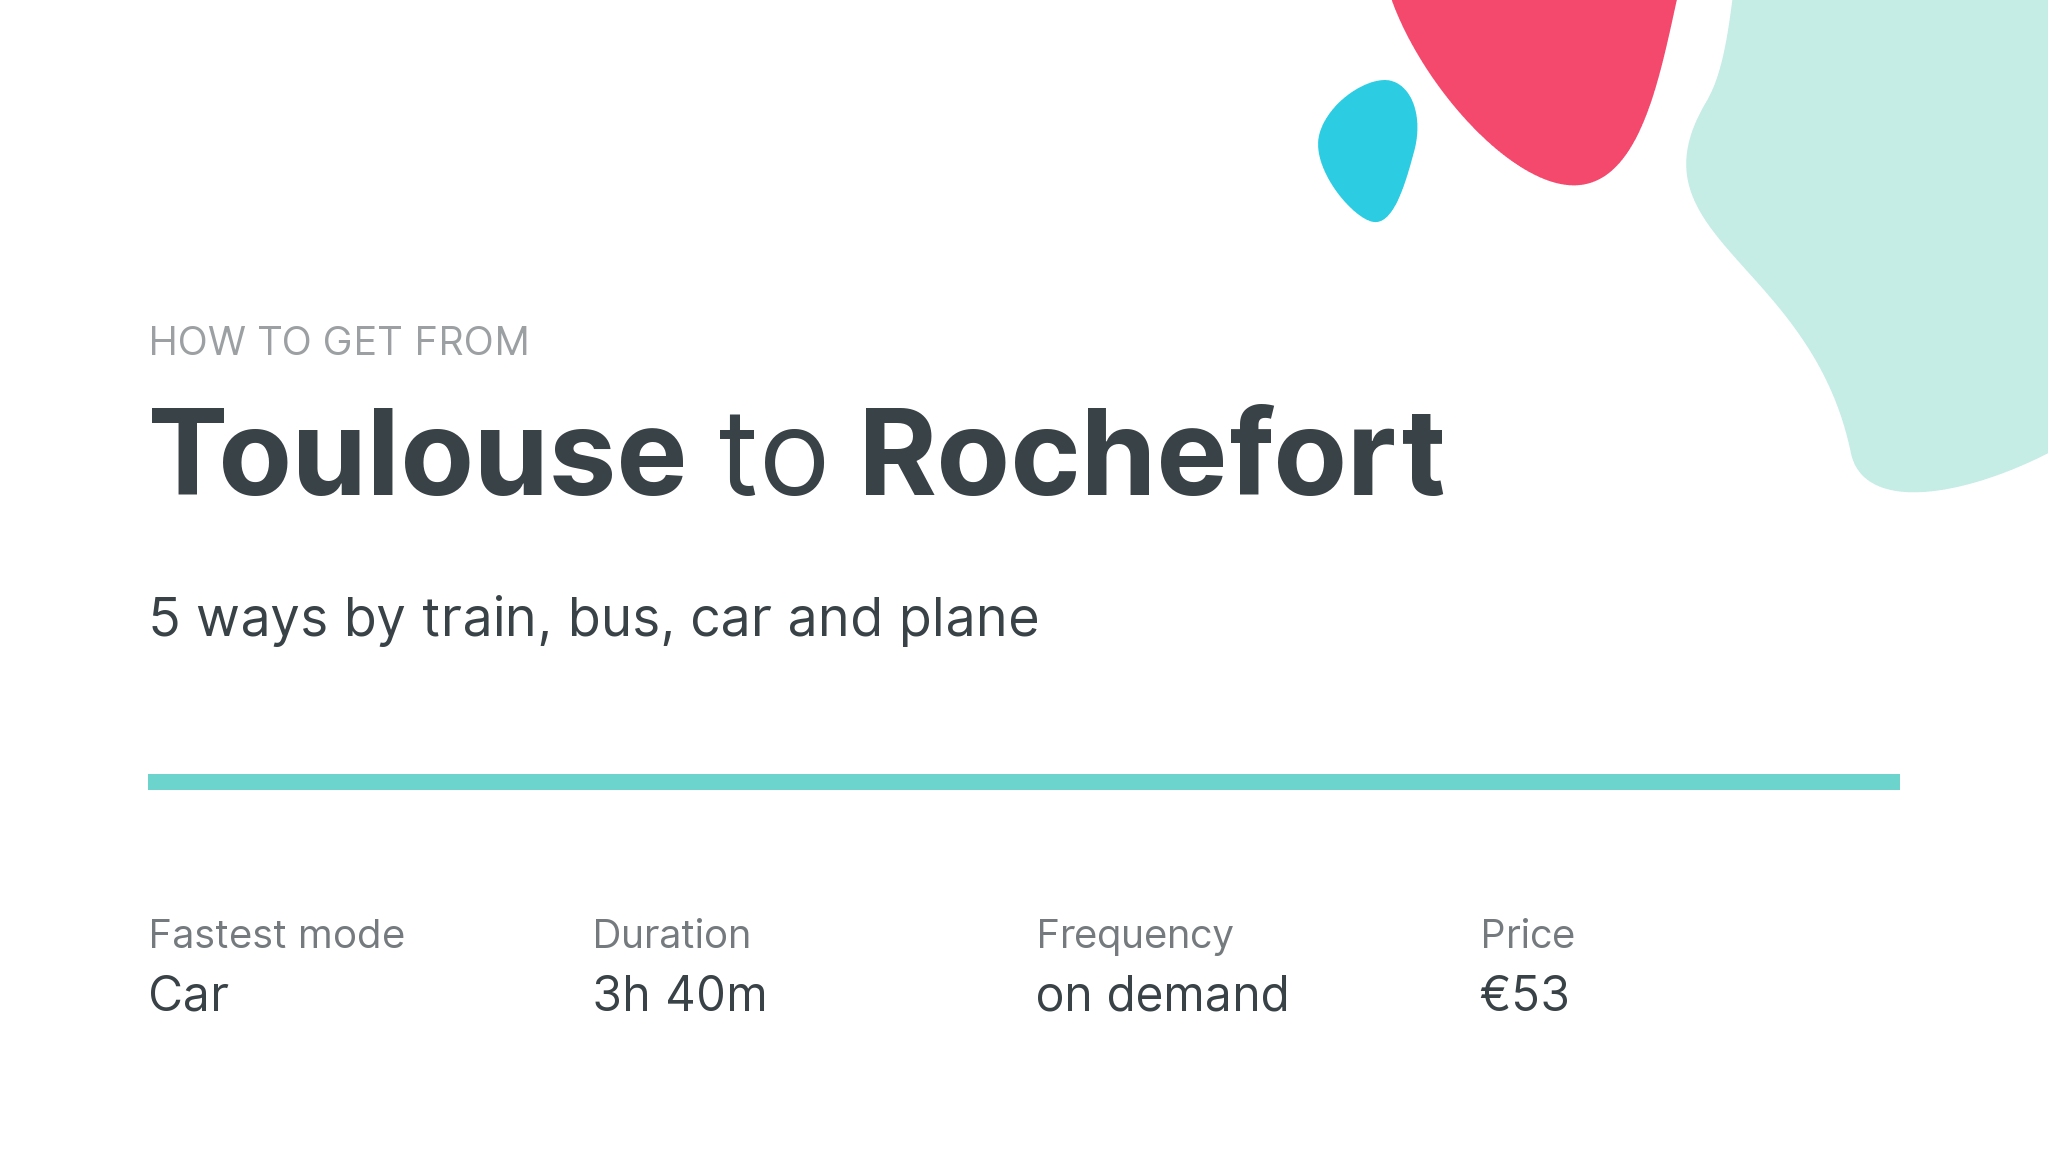 How do I get from Toulouse to Rochefort